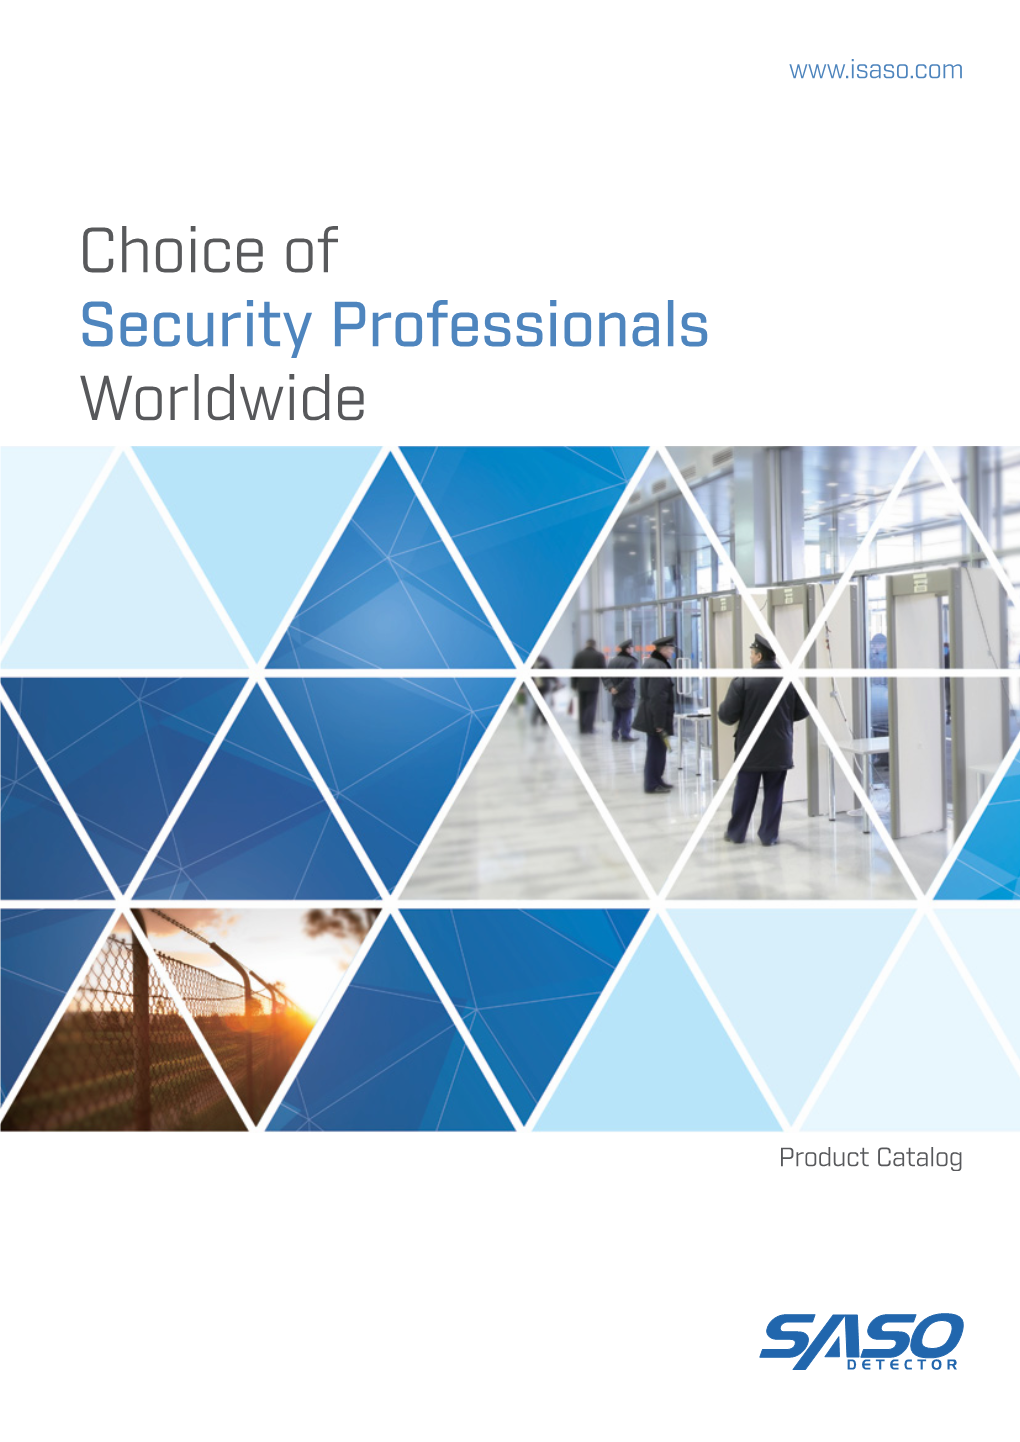 Choice of Security Professionals Worldwide